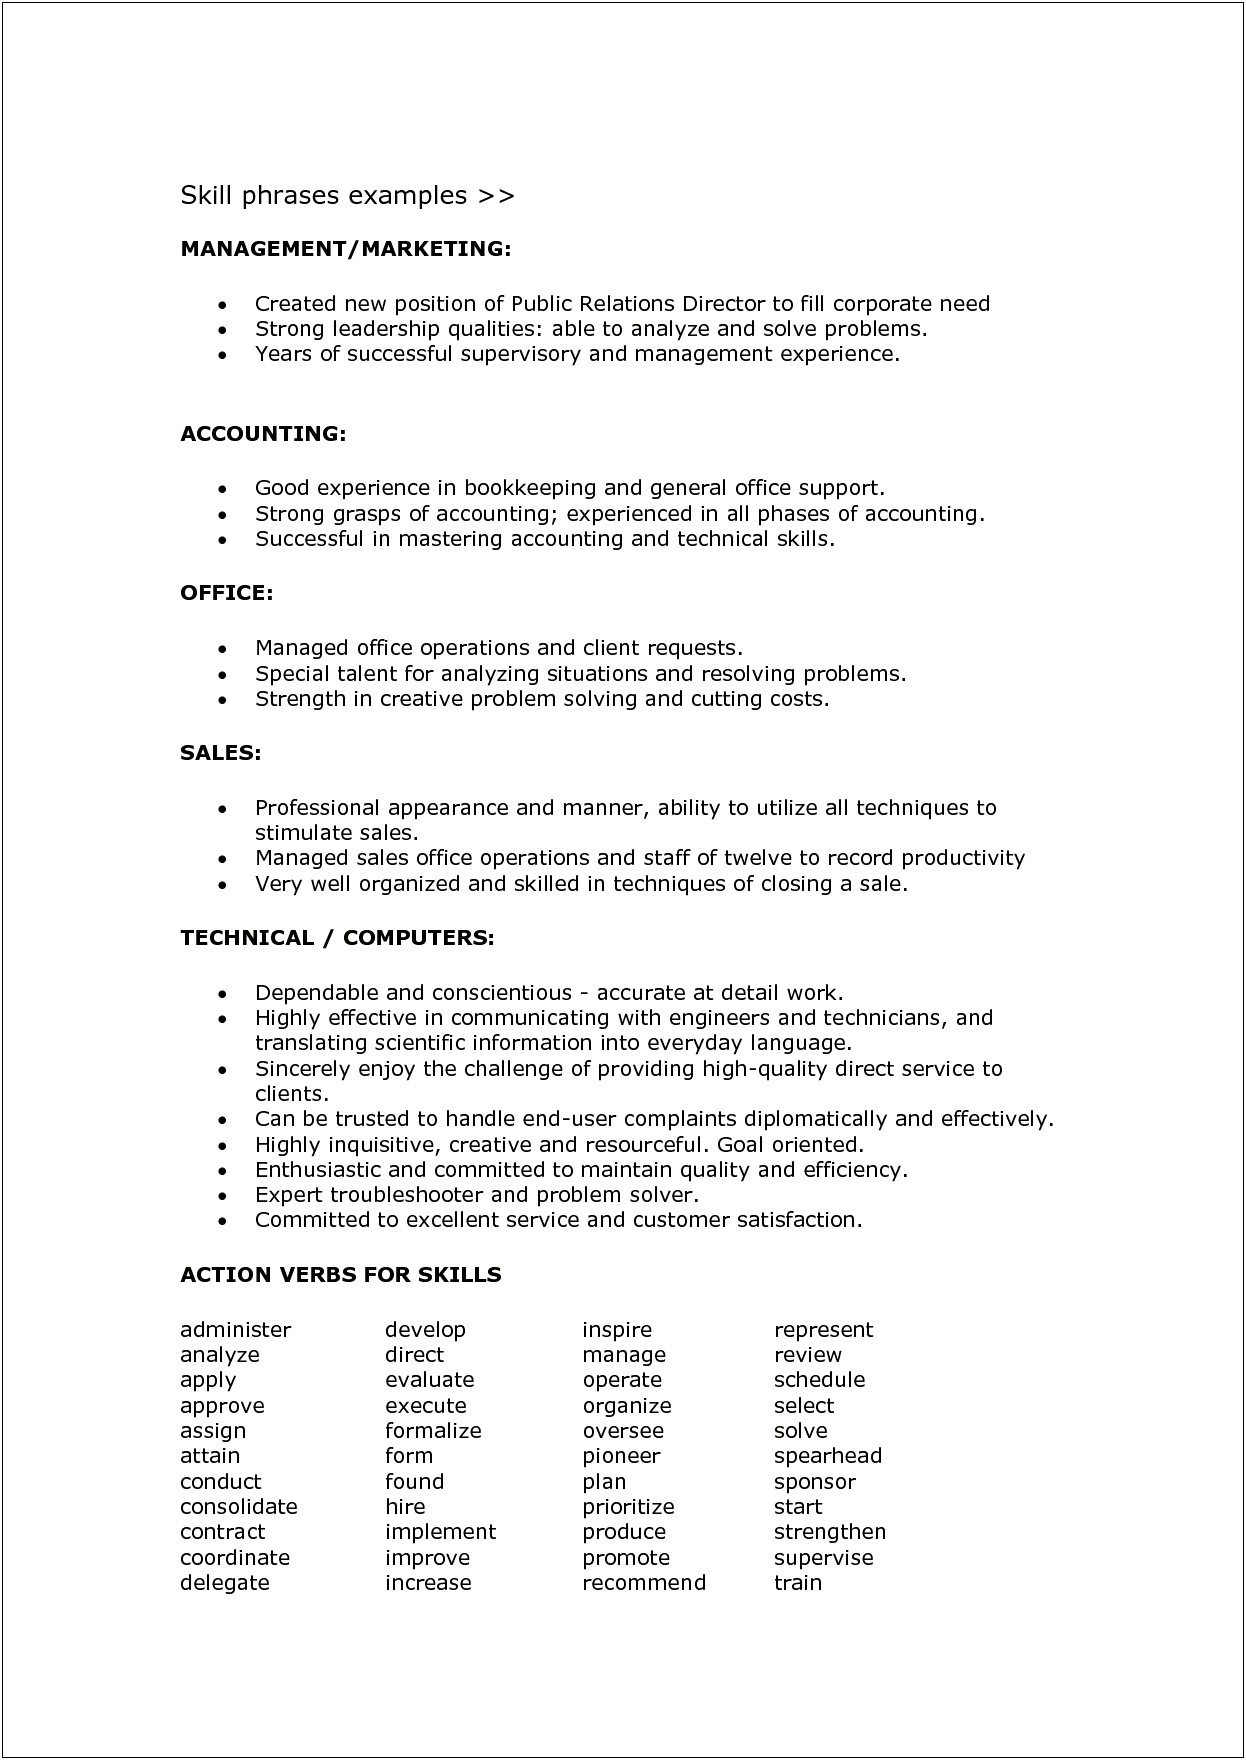 List Of Common Technology Skills For Resumes